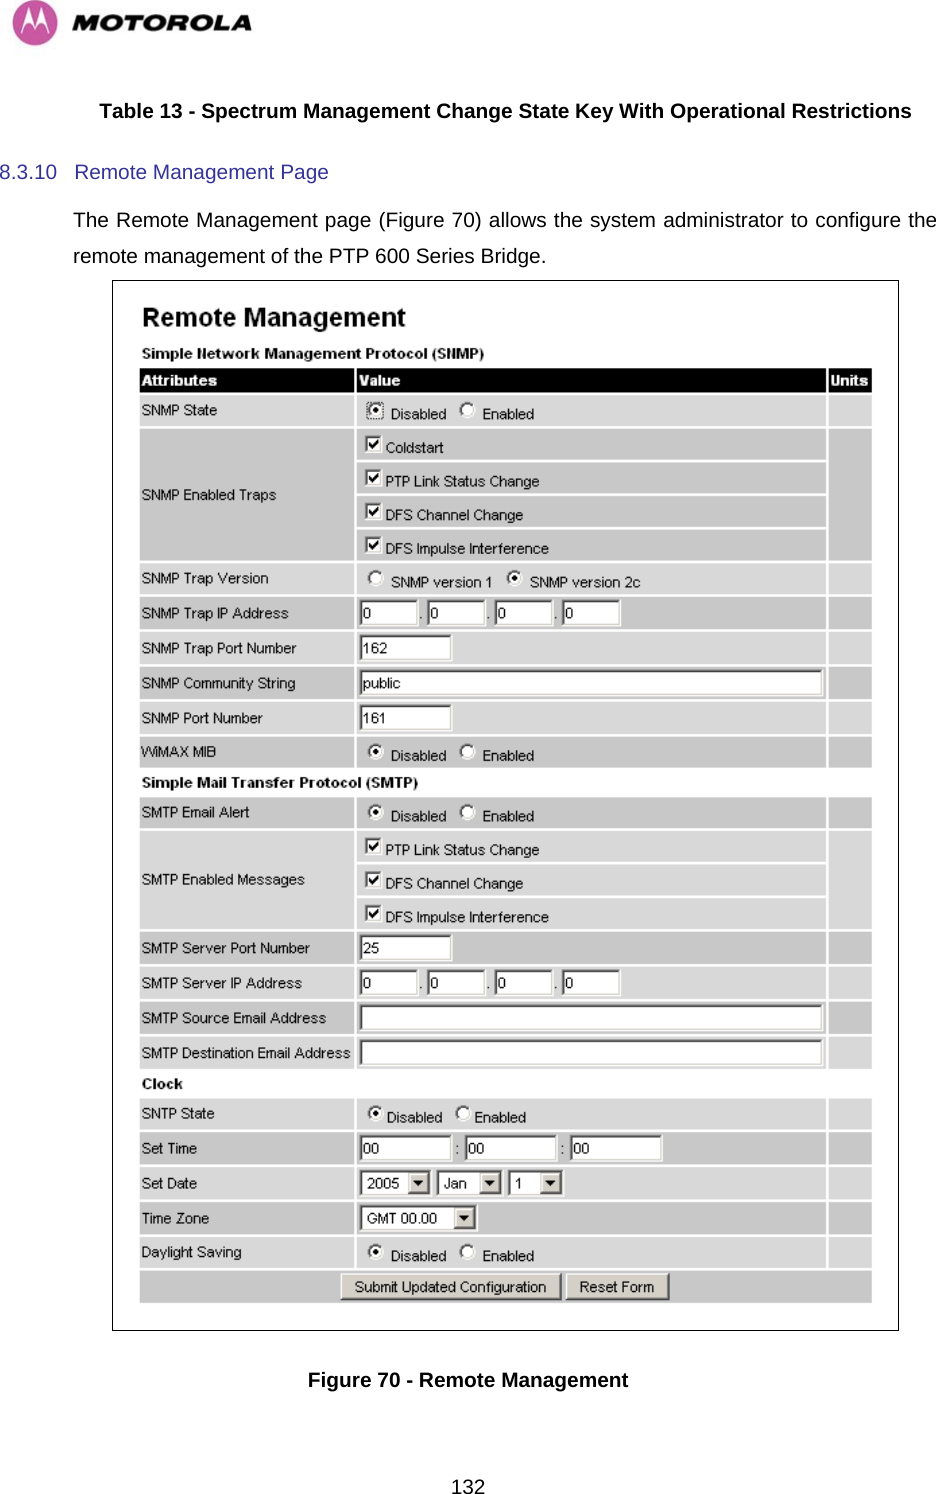   132Table 13 - Spectrum Management Change State Key With Operational Restrictions 8.3.10  Remote Management Page The Remote Management page (Figure 70) allows the system administrator to configure the remote management of the PTP 600 Series Bridge.  Figure 70 - Remote Management 